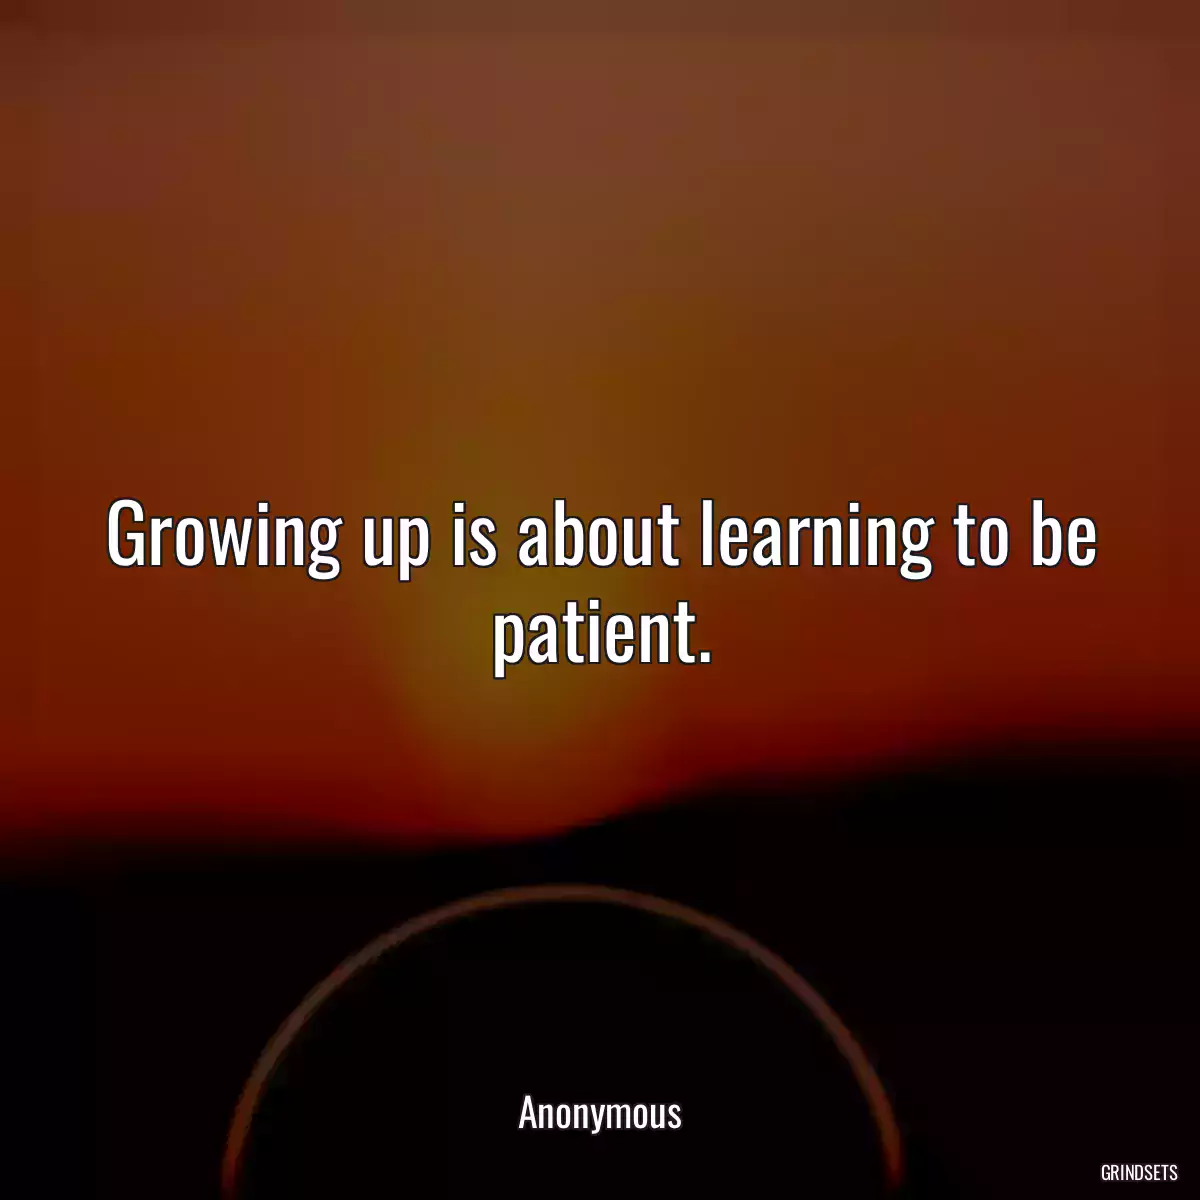 Growing up is about learning to be patient.